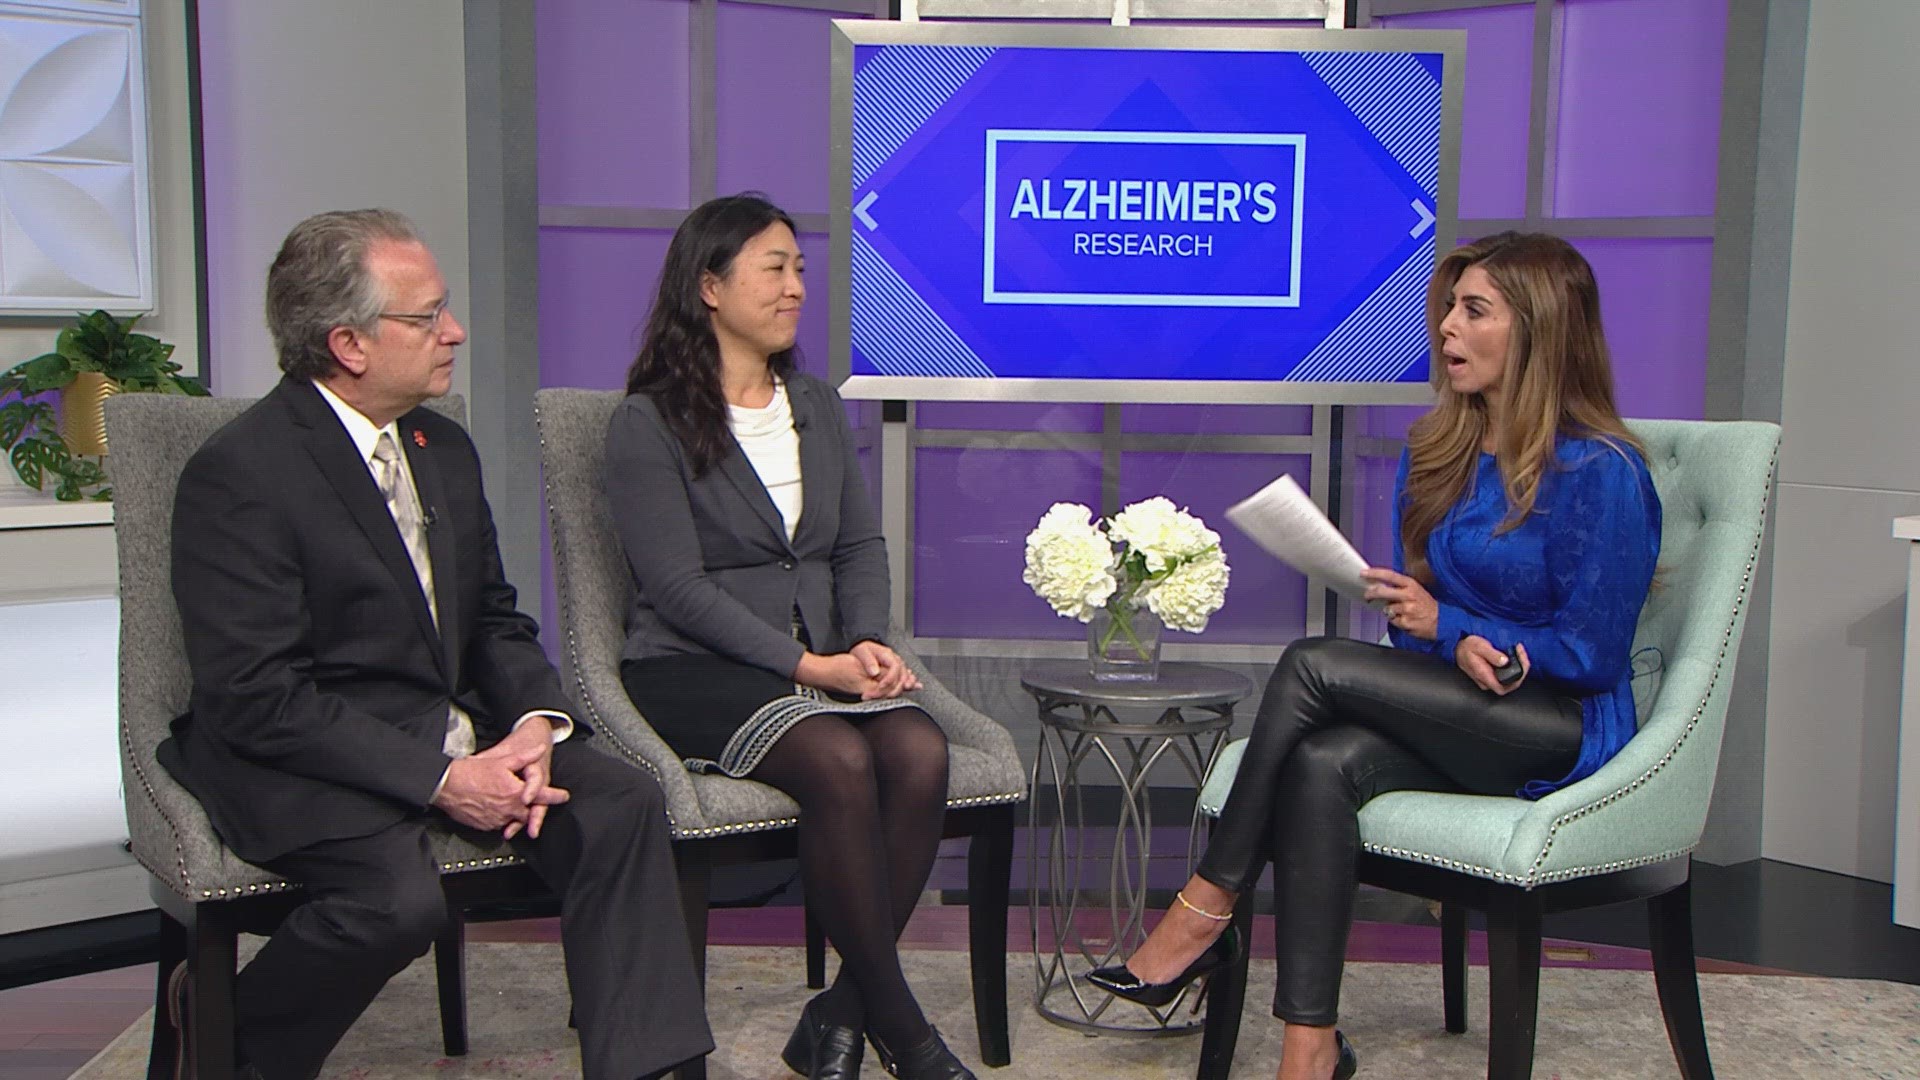 The Alzheimer's Association is funding new research to help care-partners of people who are living with Alzheimer's or dementia.